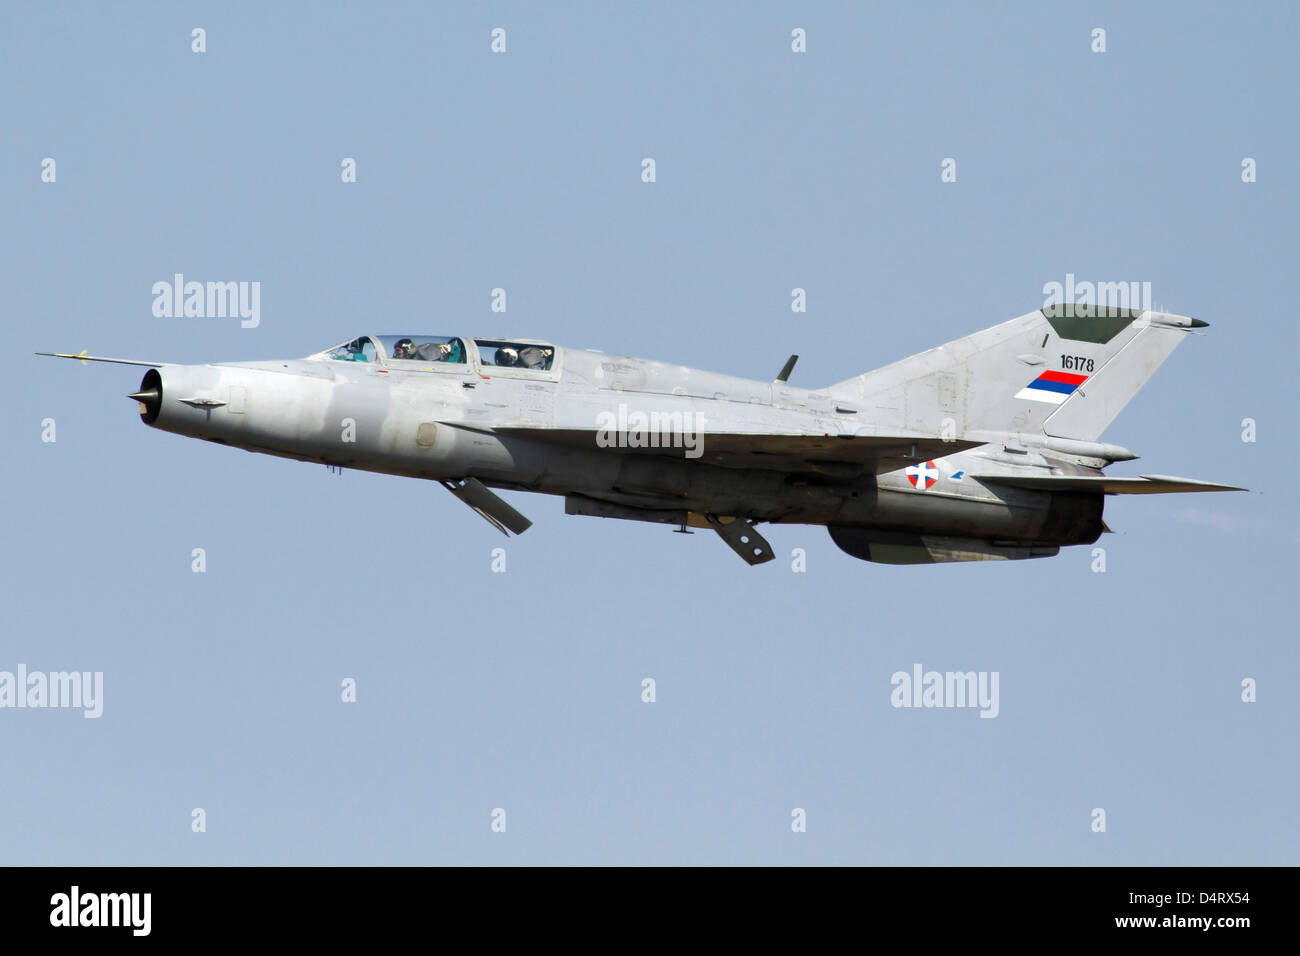 A Serbian Air Force MiG-21UM jet fighter with air brakes, in flight over Serbia. Stock Photo